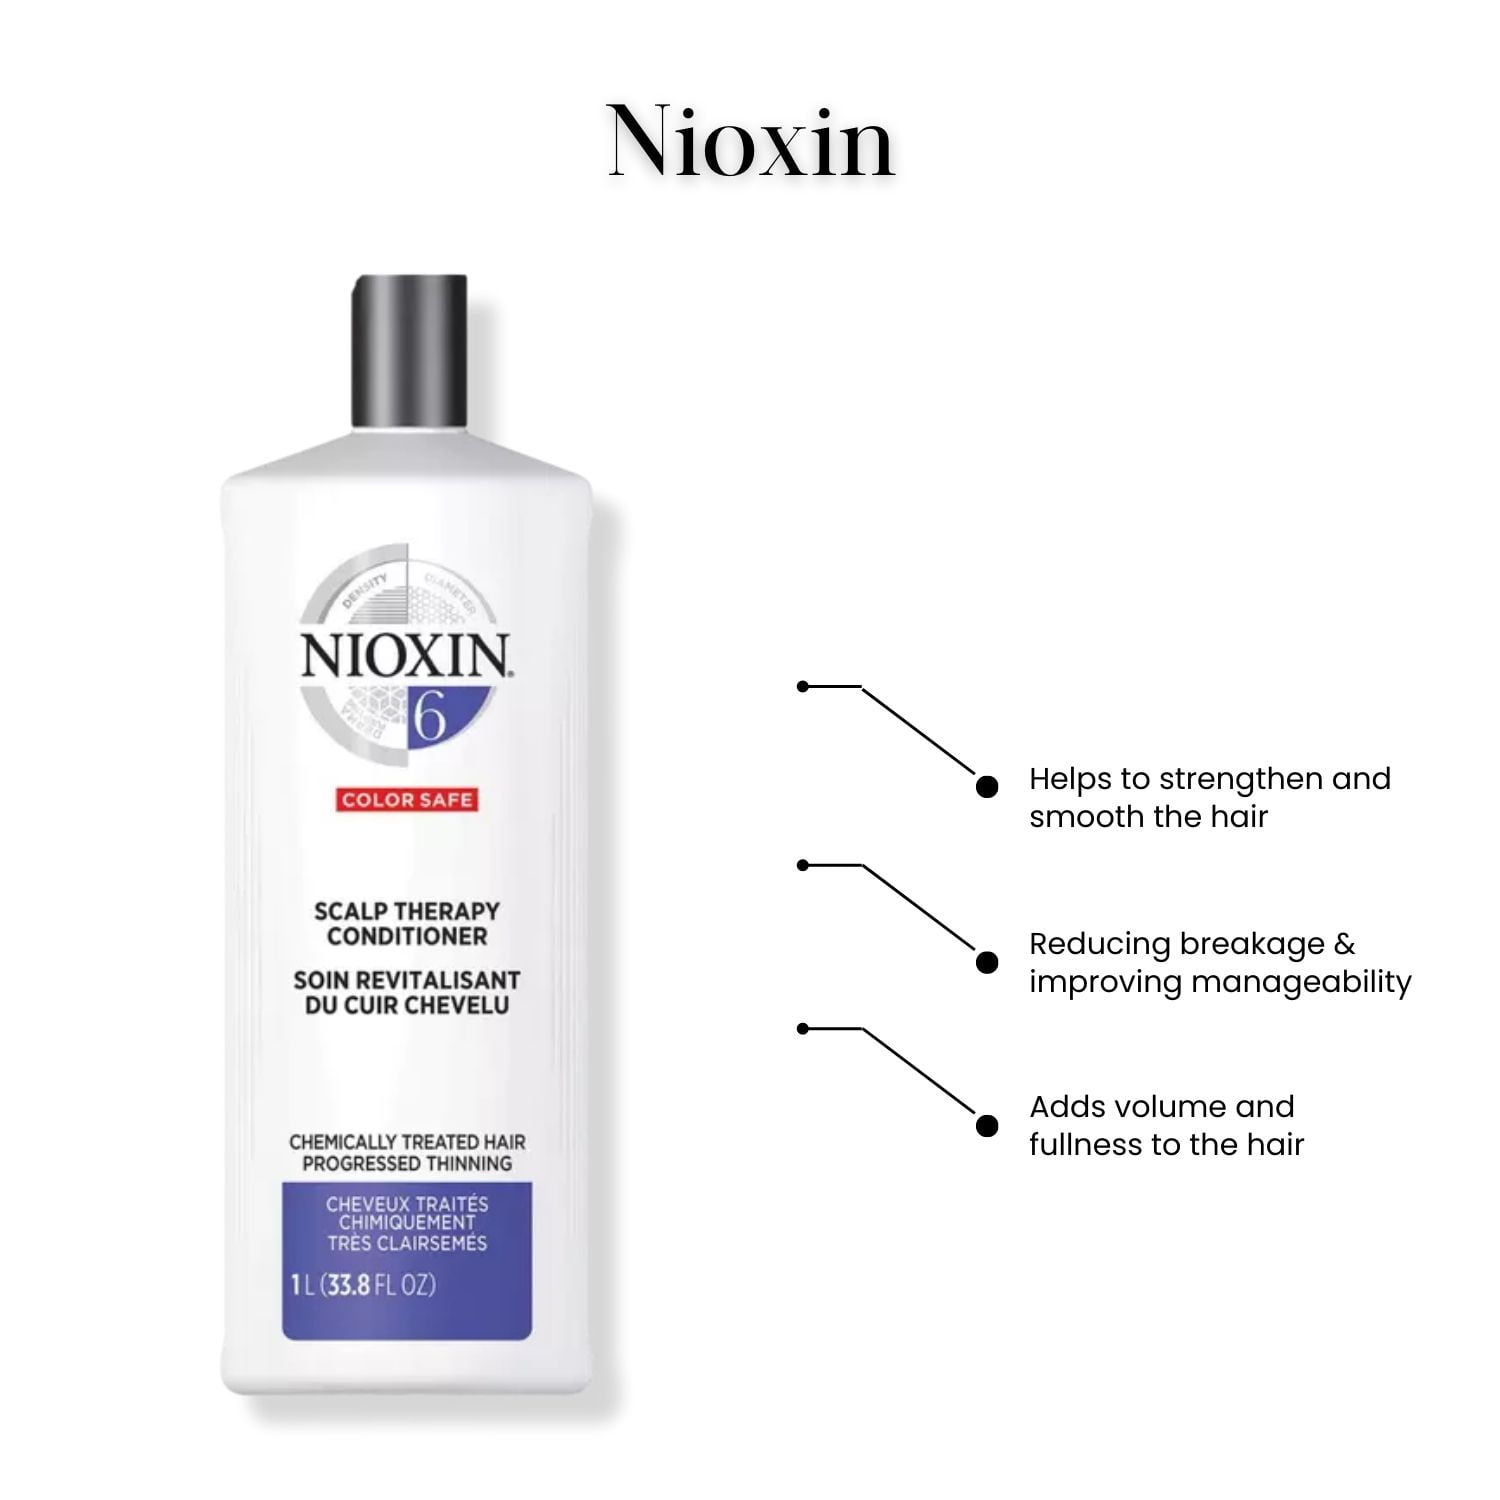 regulere Afvise Genbruge Nioxin System 6 Scalp Therapy Conditioner For Progressed Thinning  Chemically Treated Hair, 33.8 oz - Walmart.com